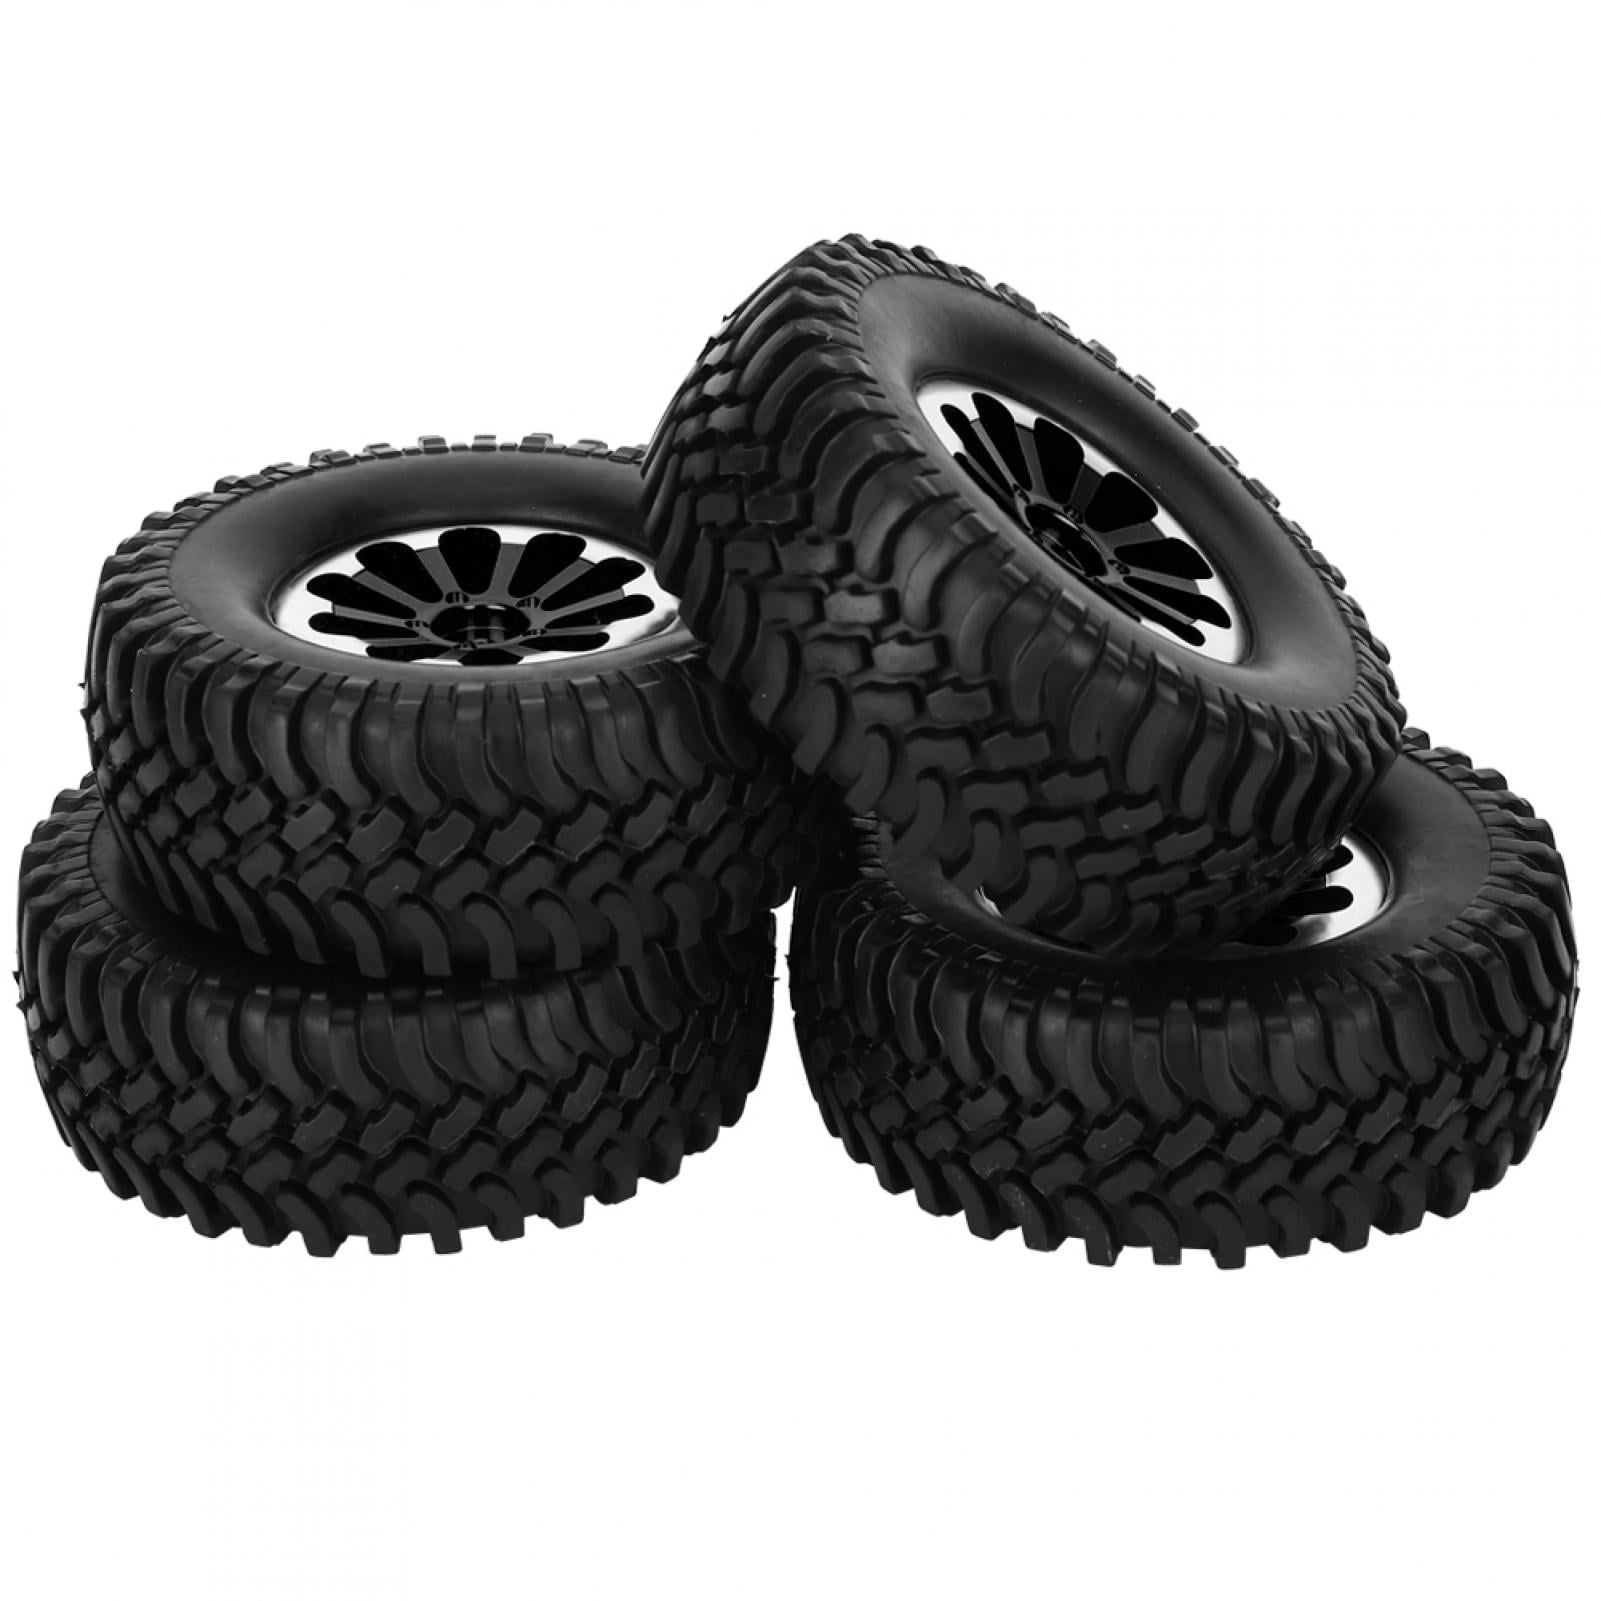 RC Tires Alloy Tires Set Replacement RC Crawler Wheel Fit for RGT 136100 1/10 RC Crawler RC Accessories